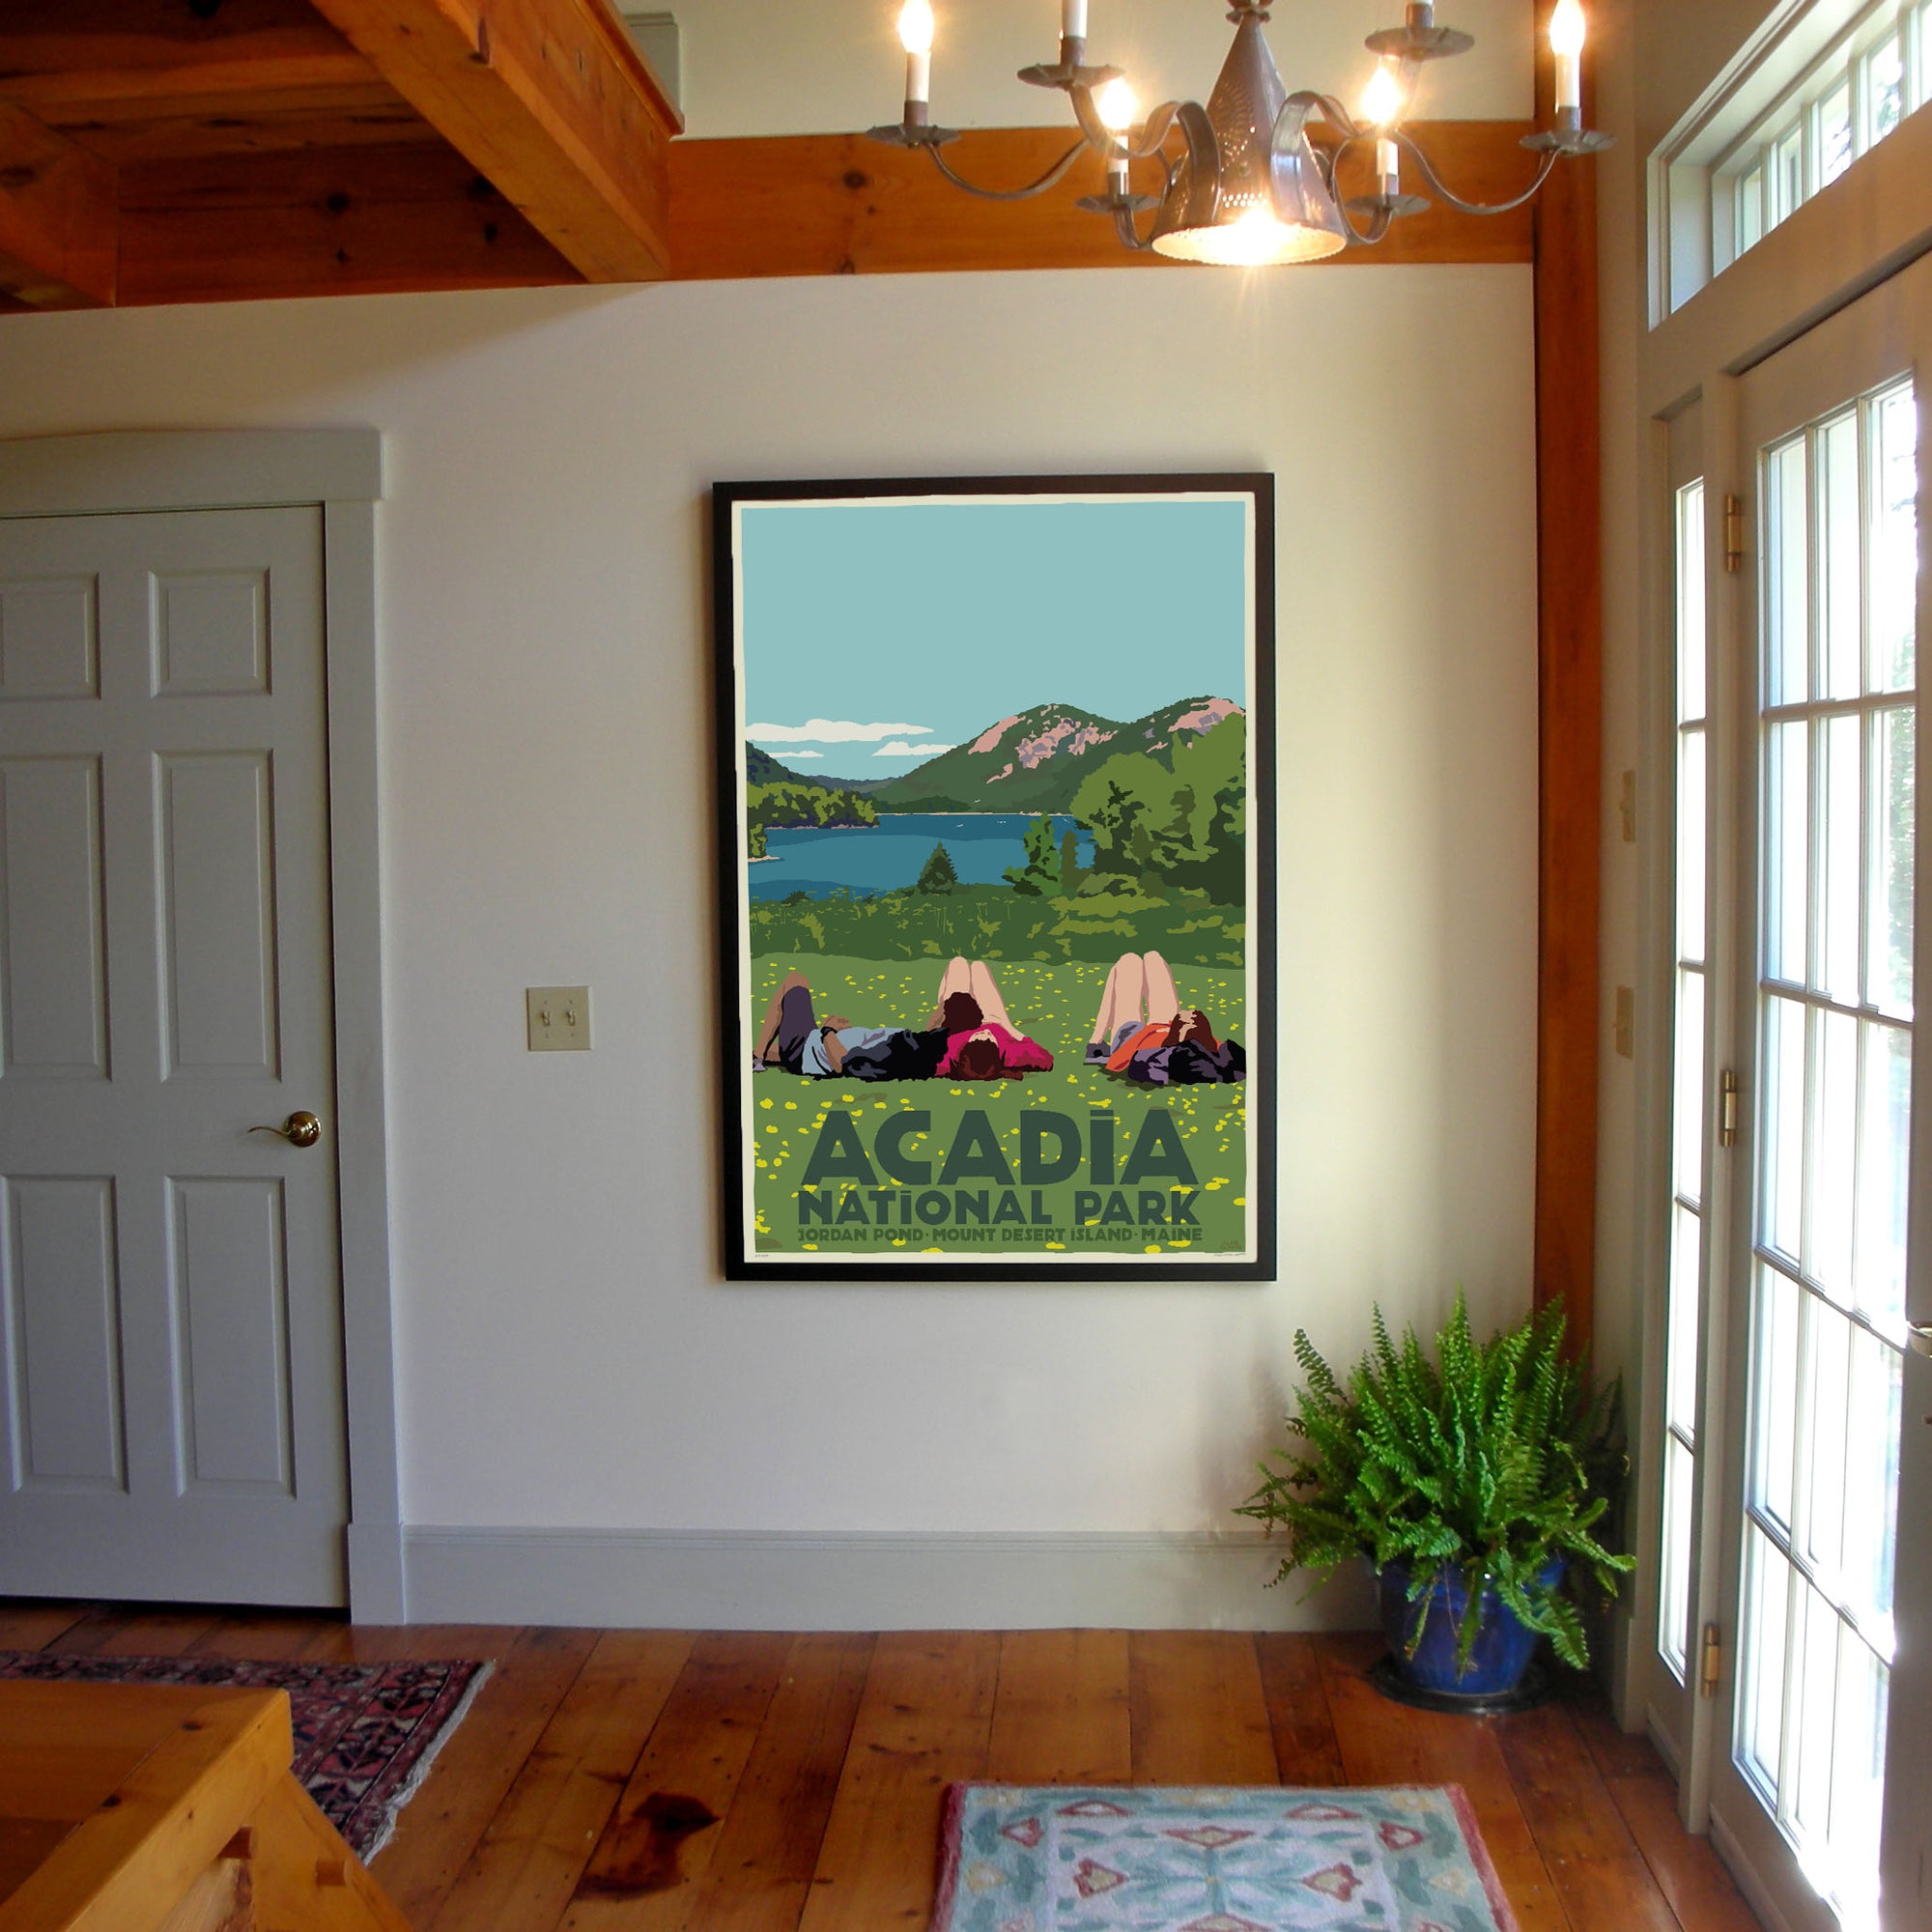 Hikers in Acadia National Park Art Print 36" x 53" Framed Wall Poster By Alan Claude - Maine